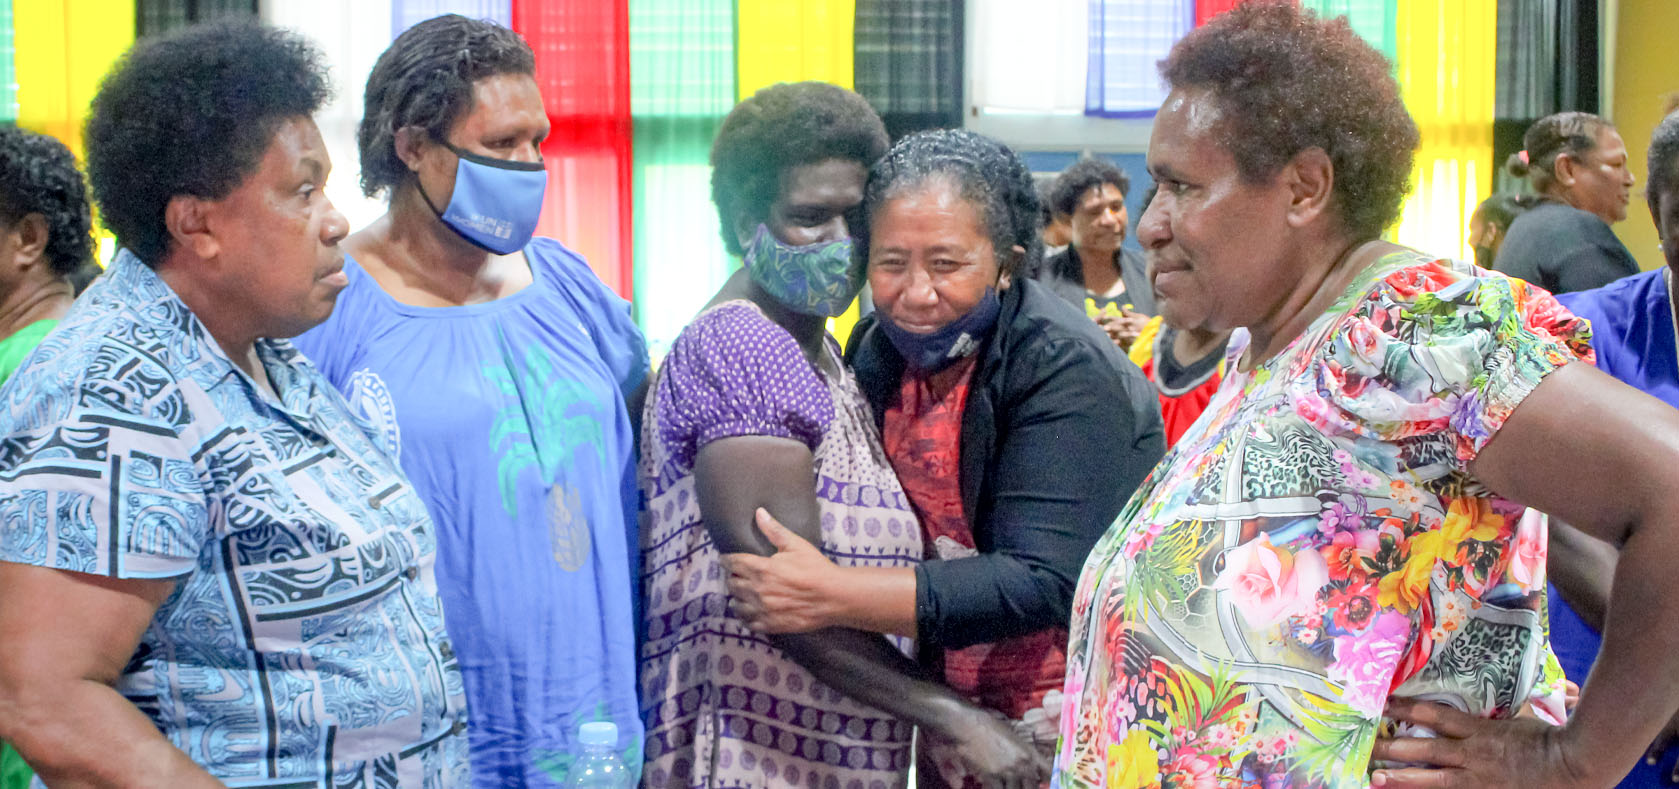 A group of PNG women are talking and greetings